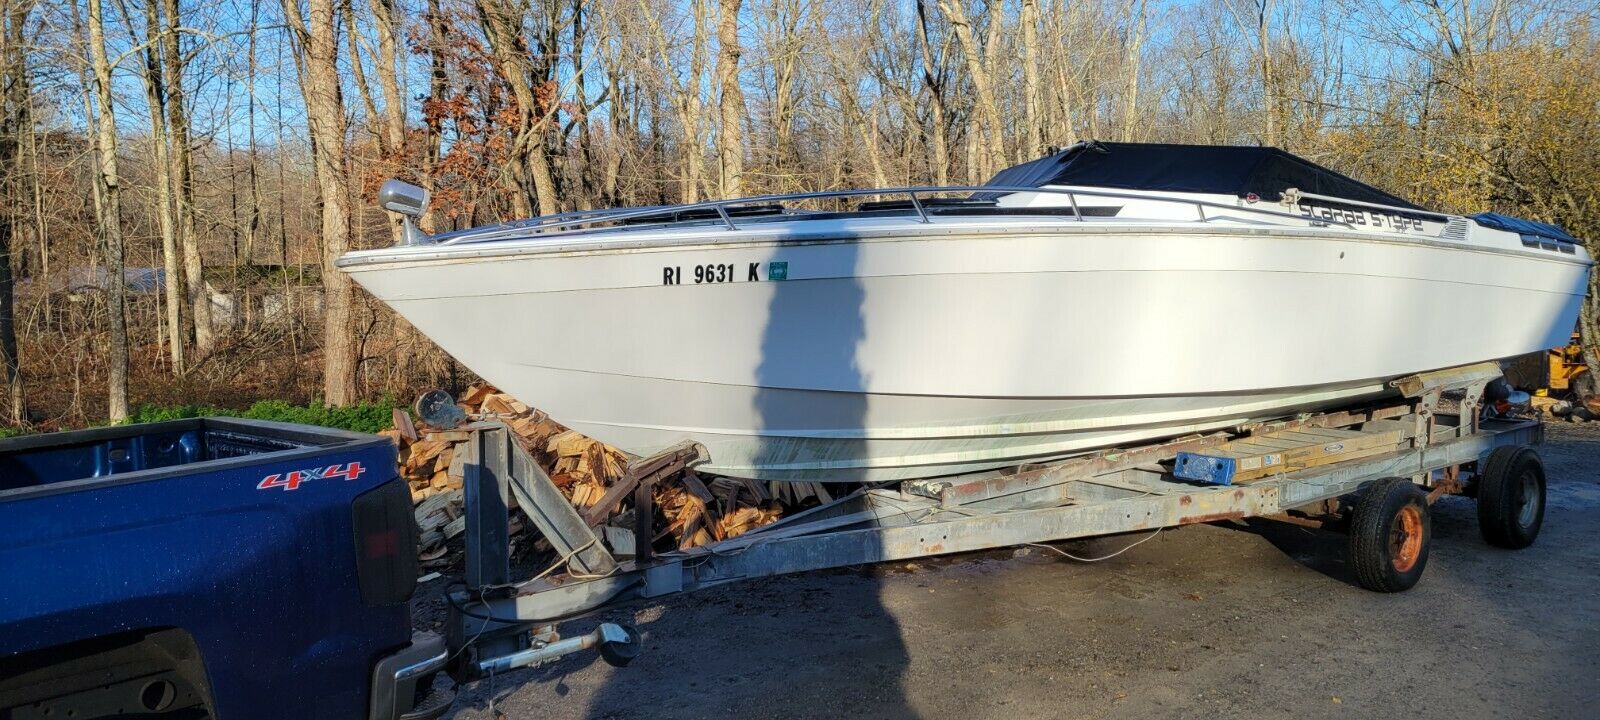 Wellcraft Scarab 30ft S-Type Boat W/ Mercruiser TRS Outdrives